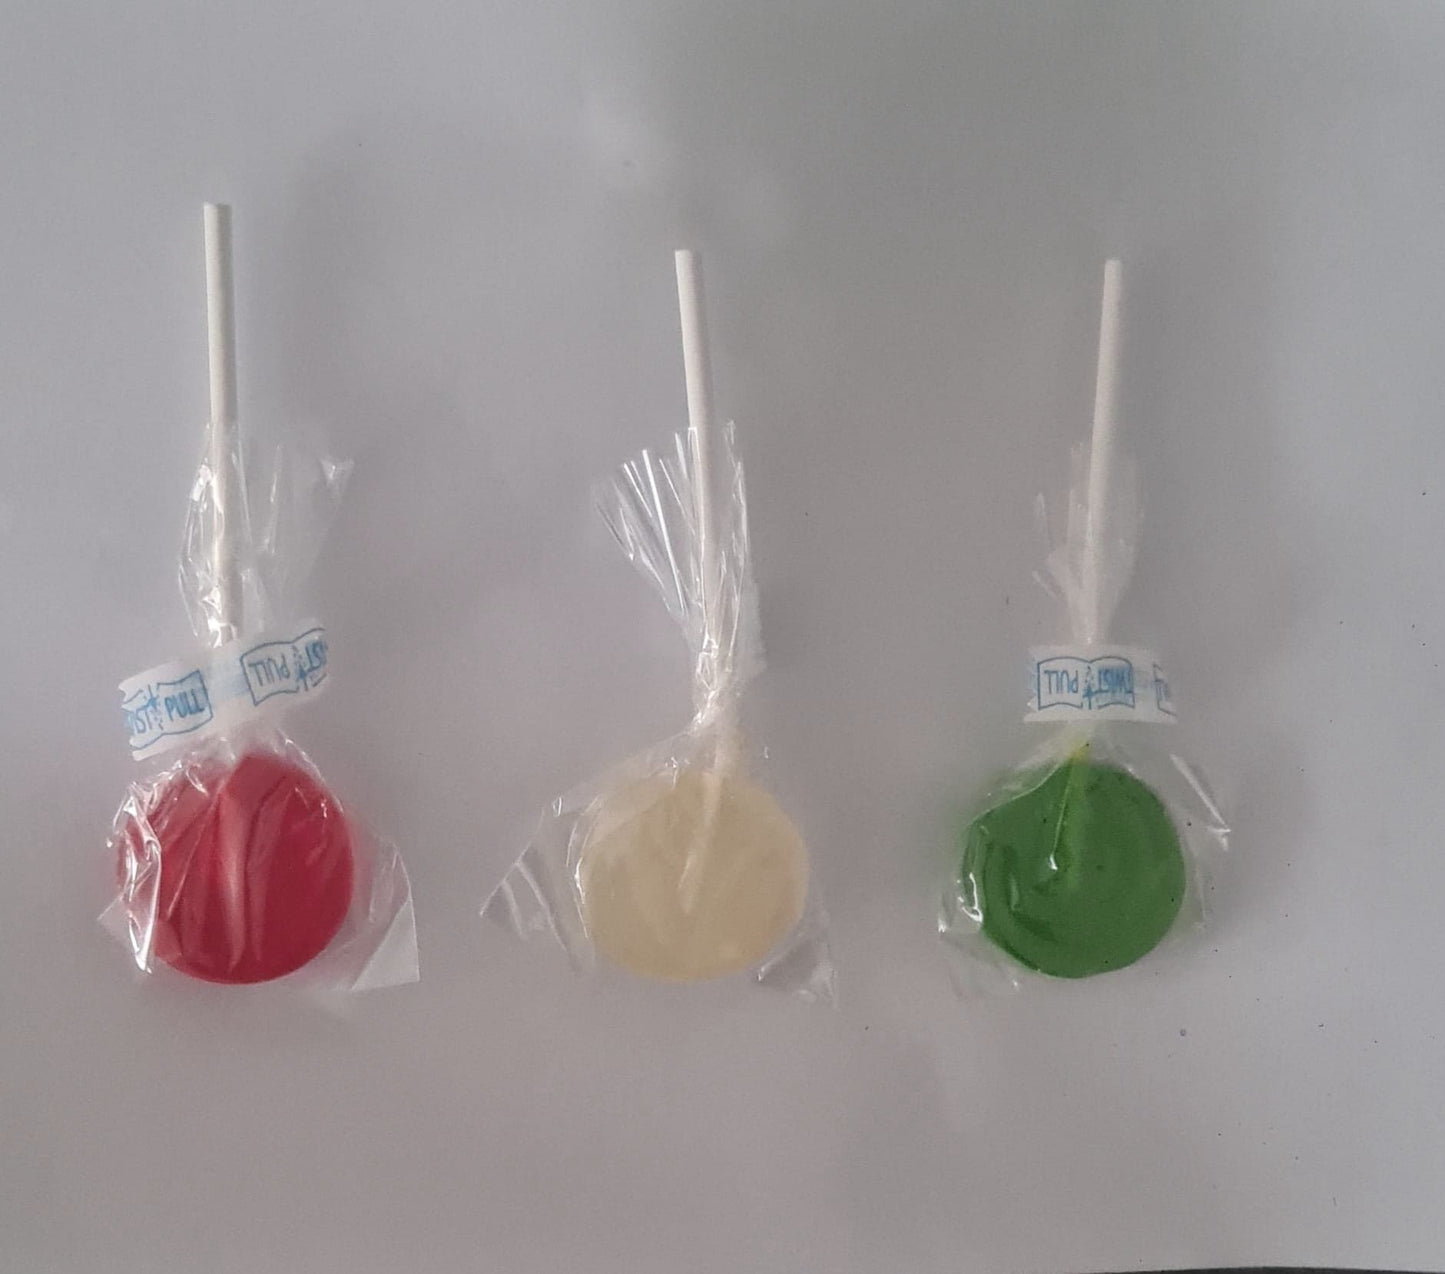 HHC 3 lolly's  70mg hhc per lolly